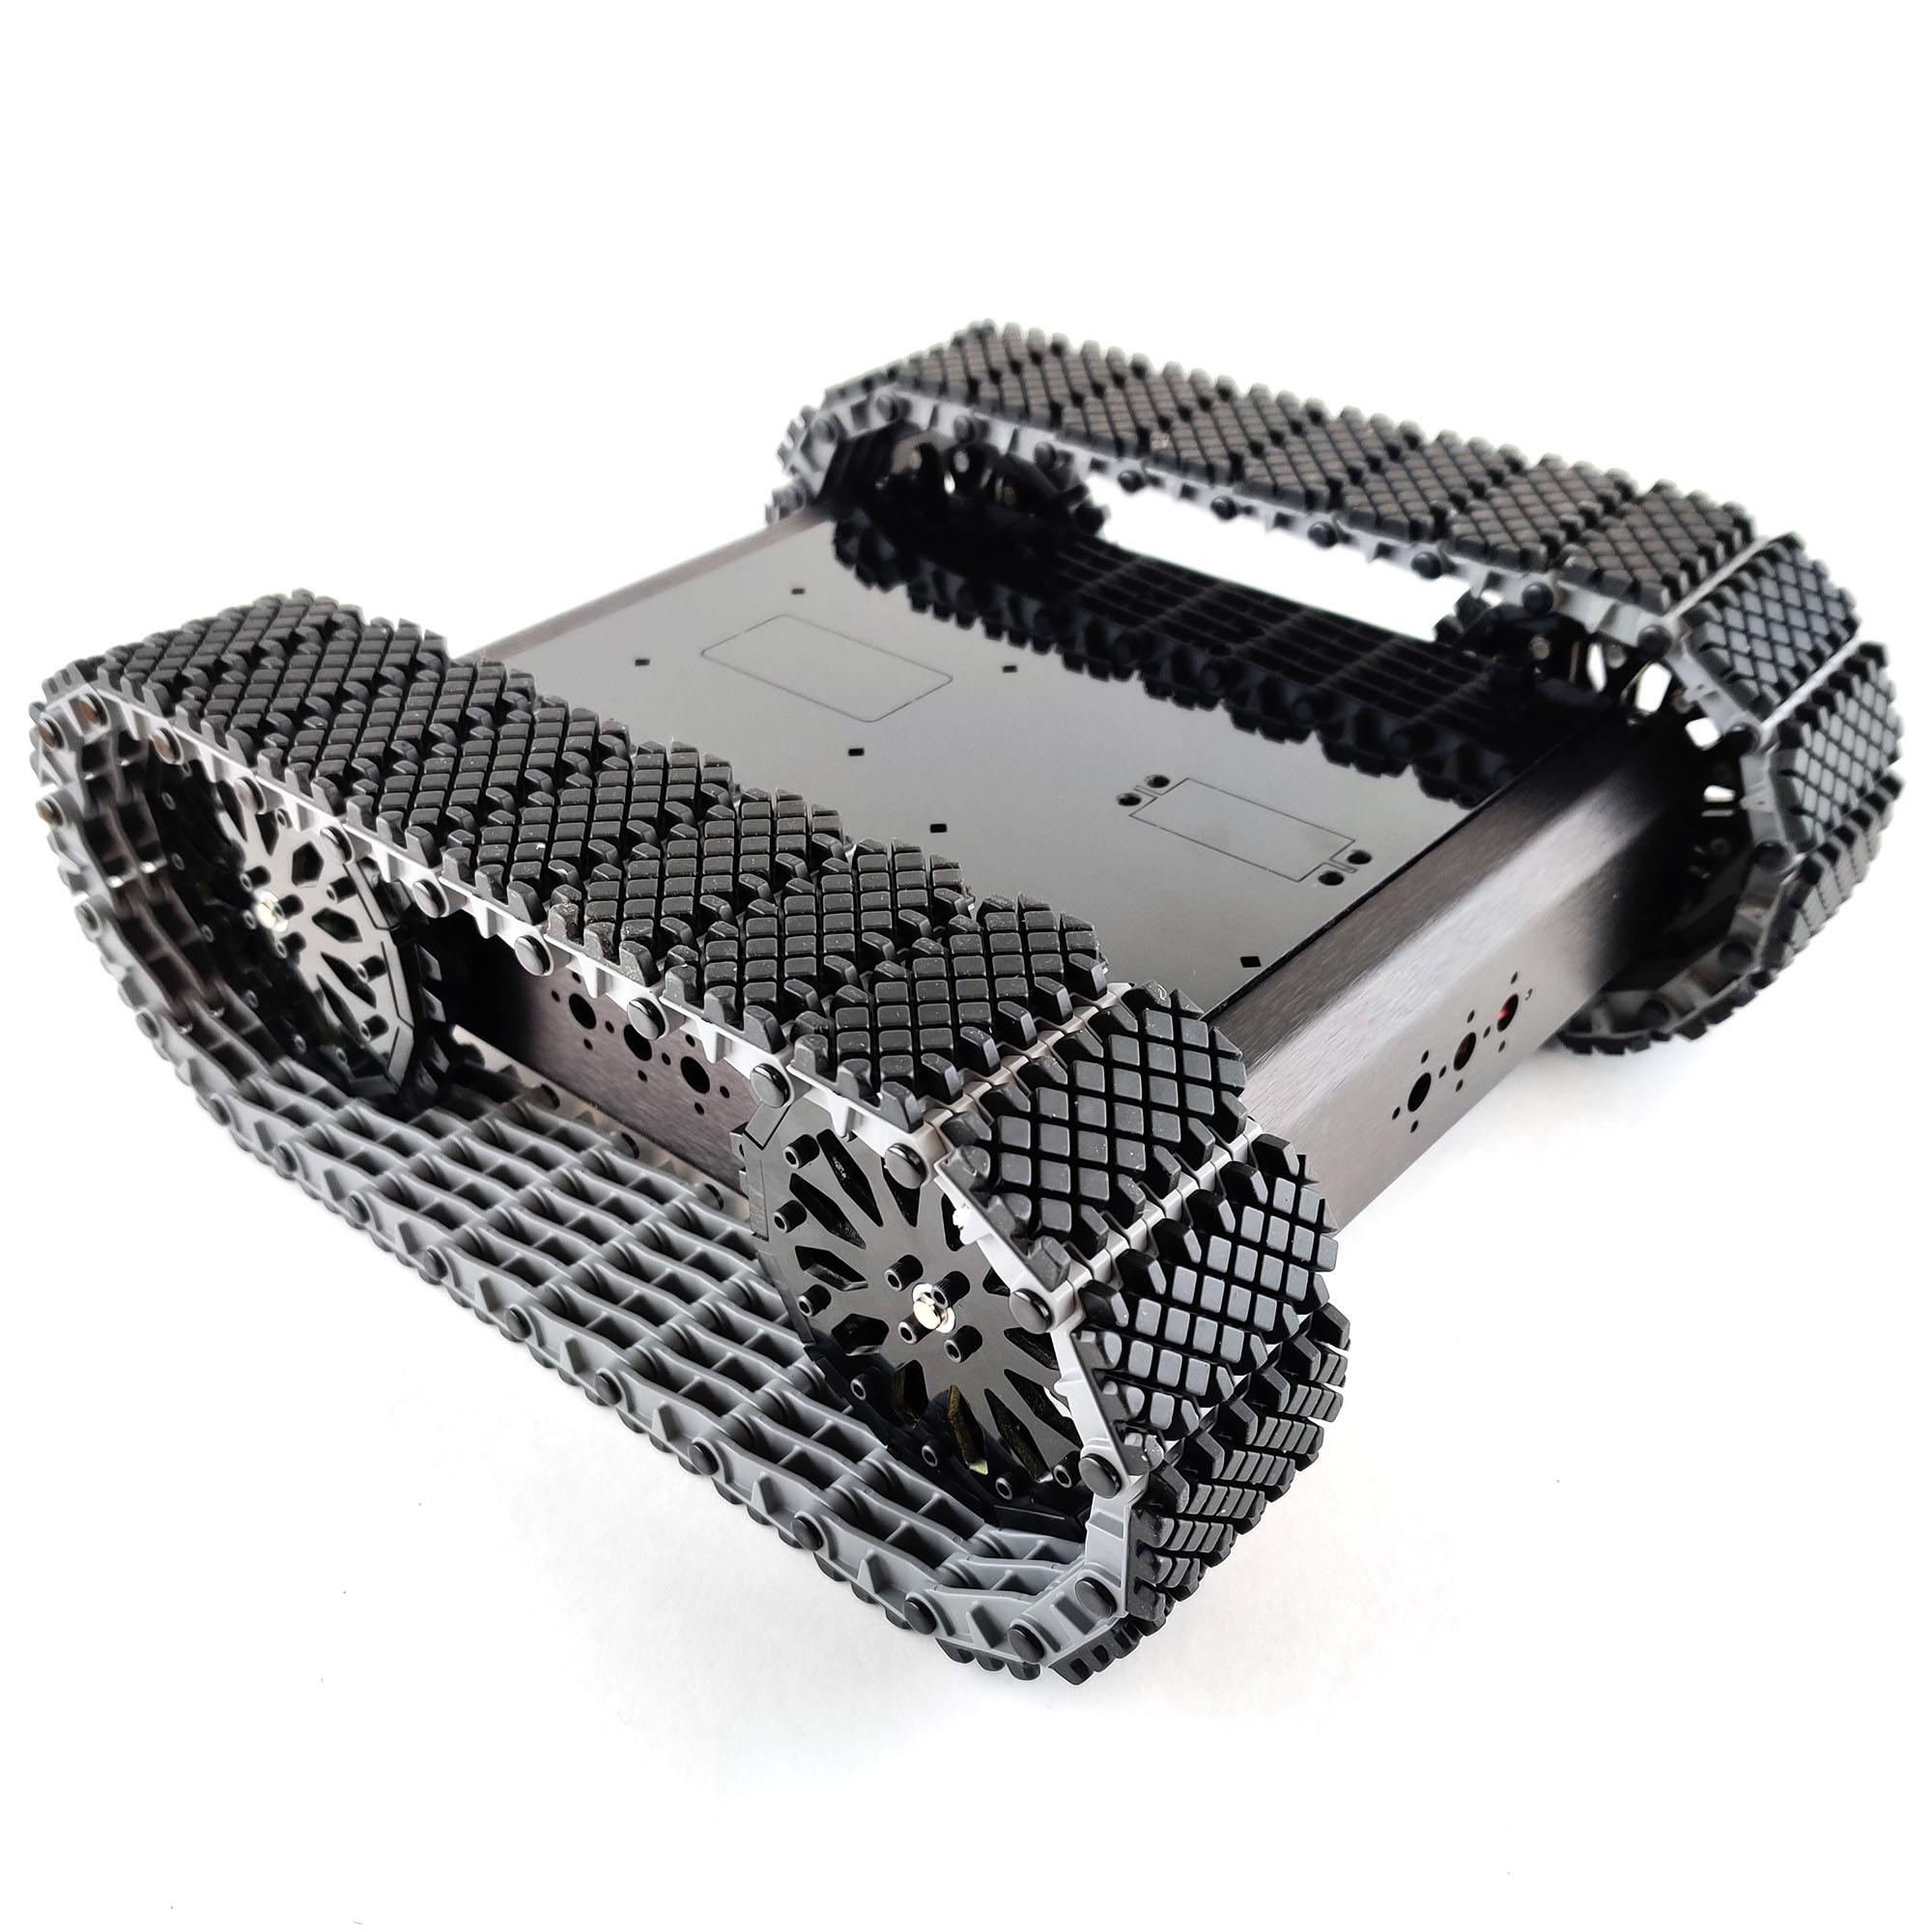 Lynxmotion Aluminum A4WD1 MTS 12T Rover Kit for RC- Click to Enlarge